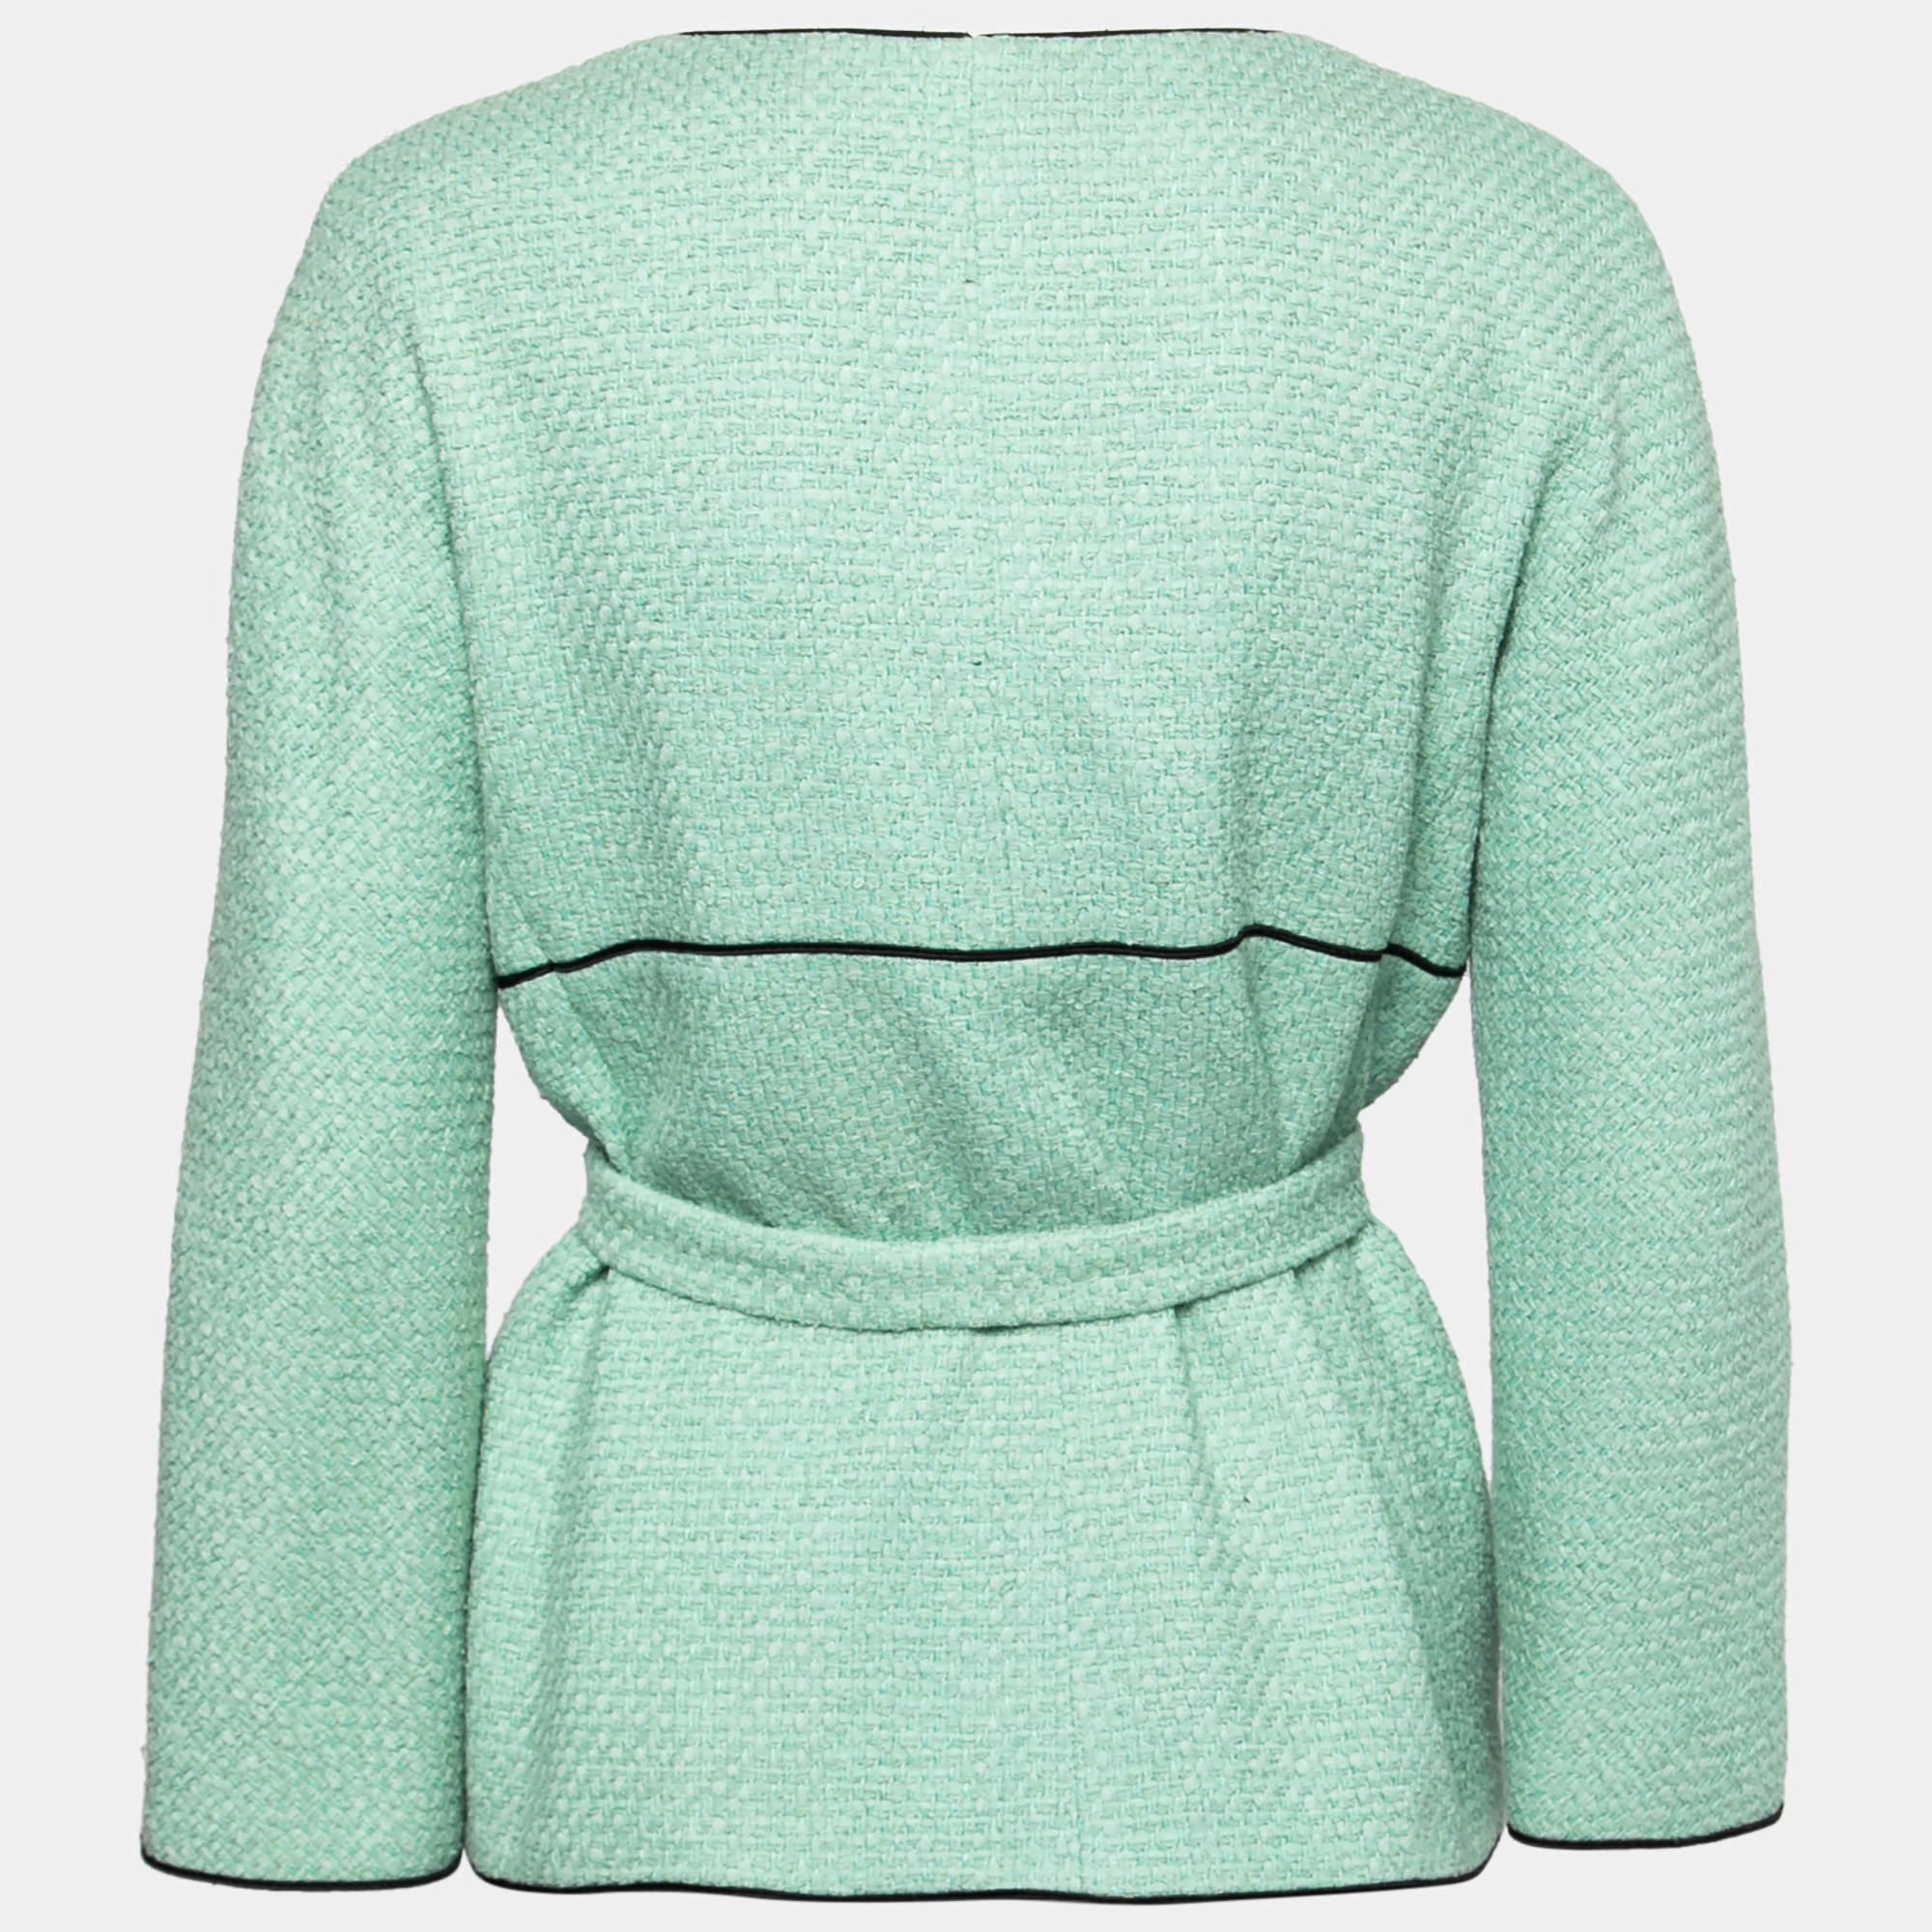 Chanel Vogue Cover Turquoise Tweed Jacket with Belt For Sale 4